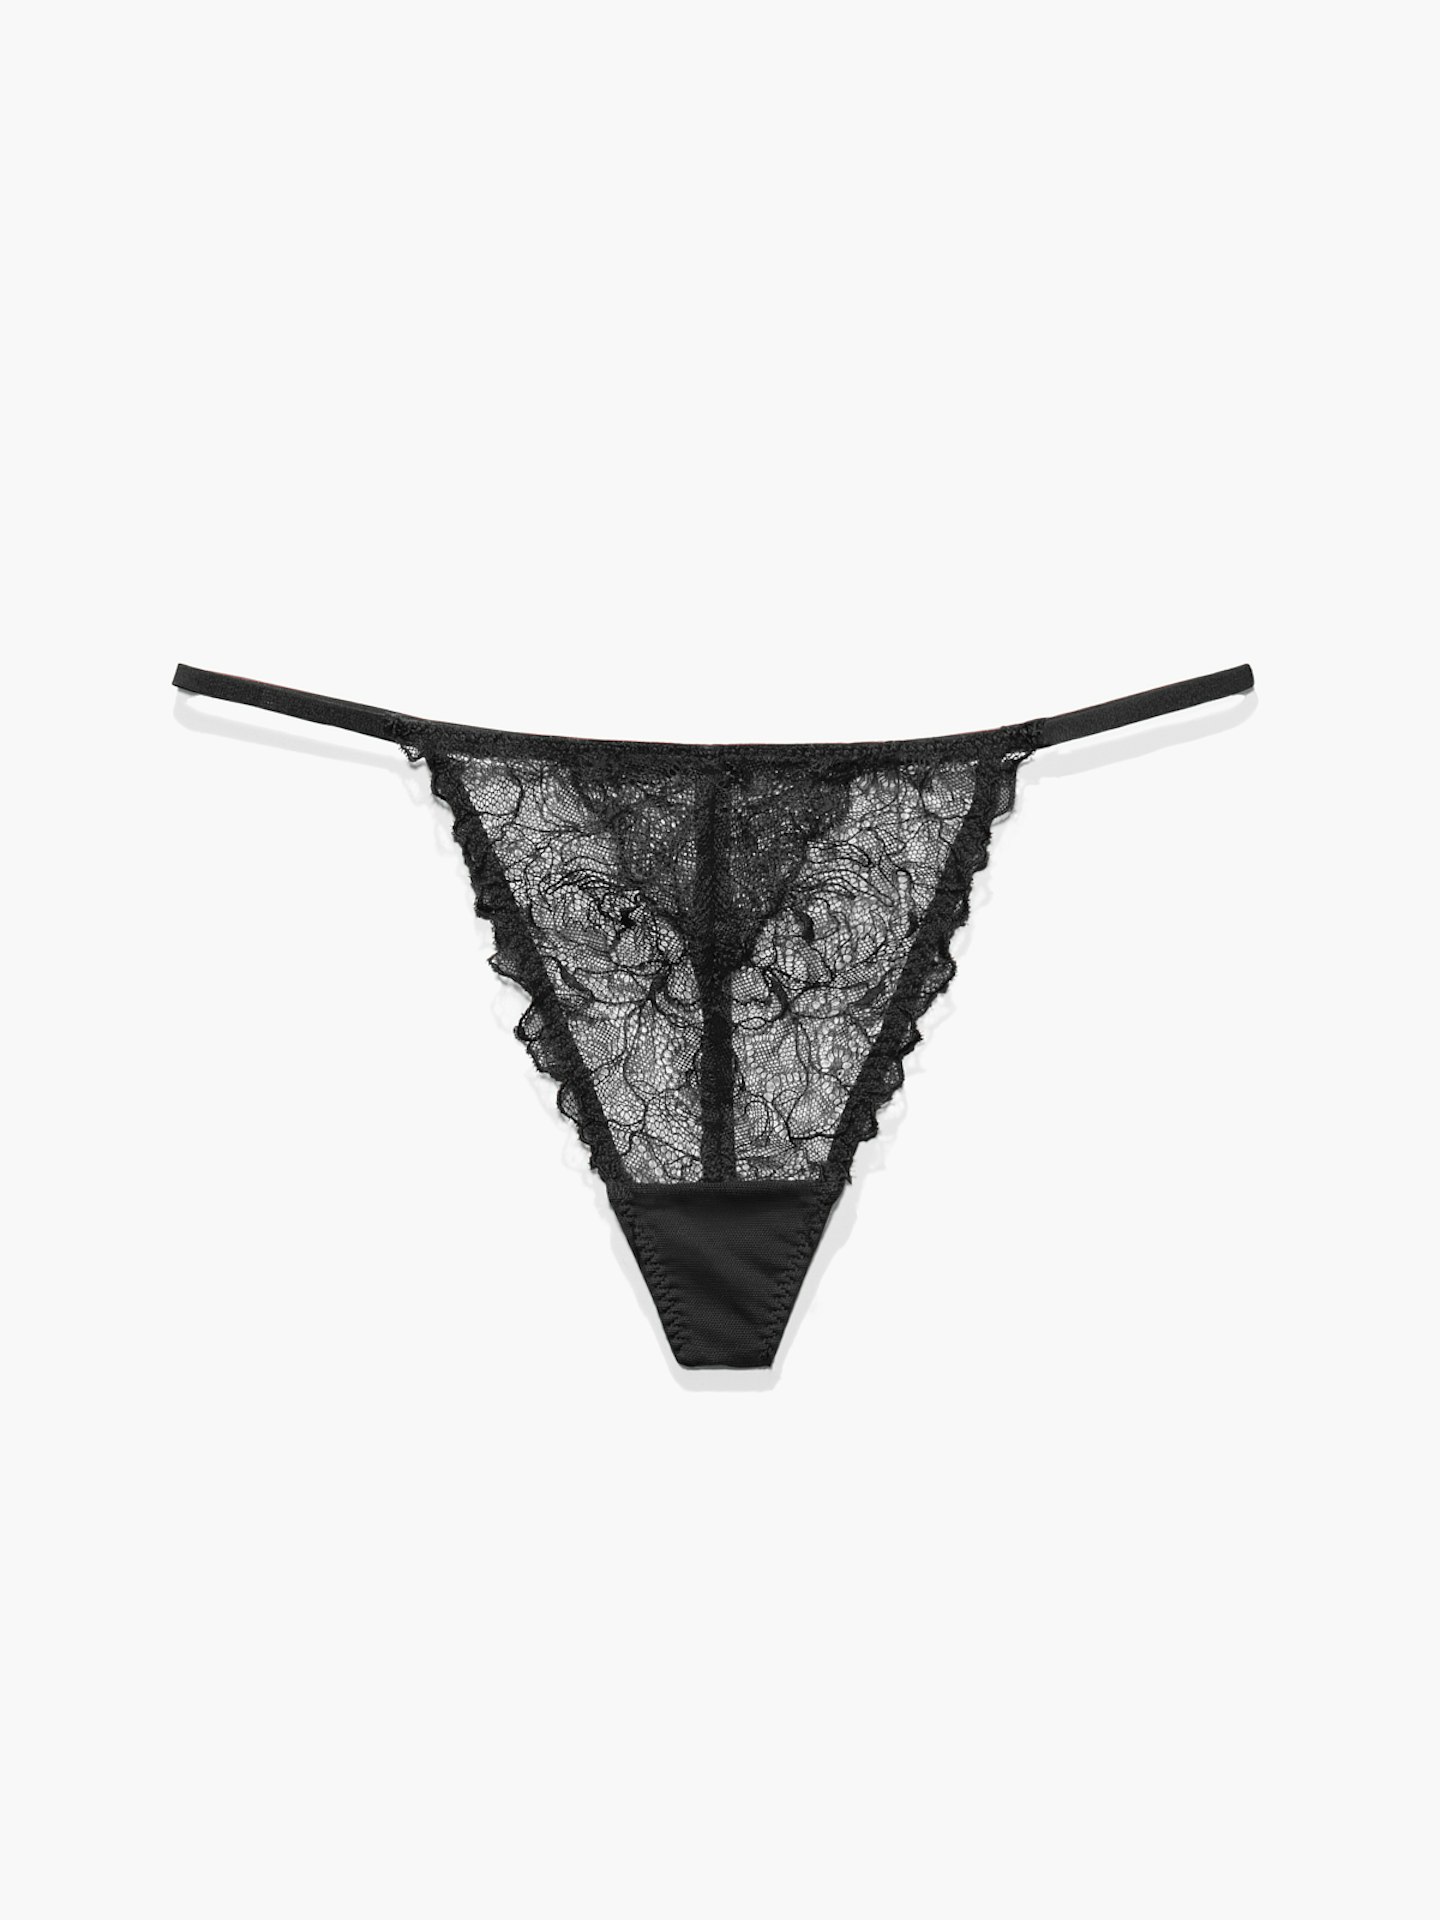 Embroidered Lace G-String, £6.40